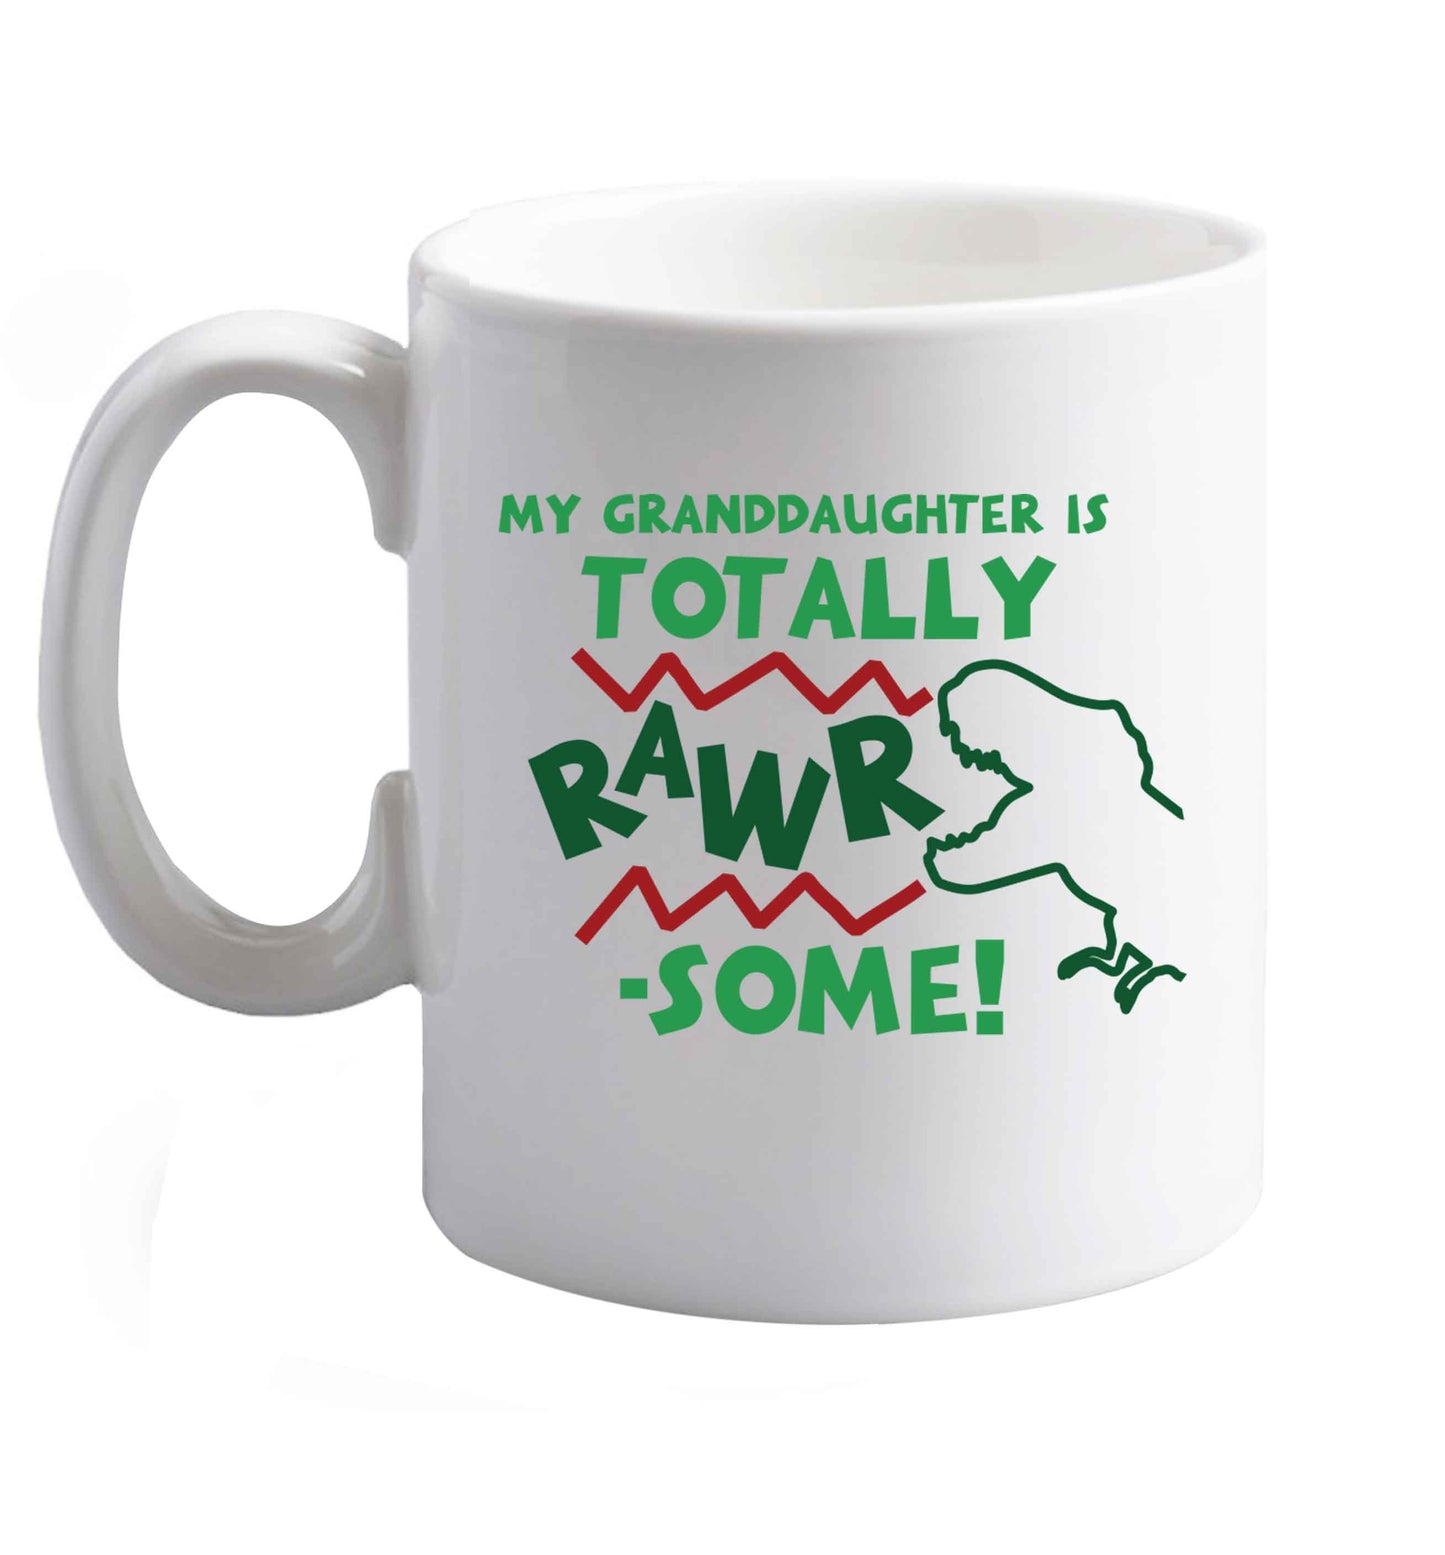 10 oz My granddaughter is totally rawrsome ceramic mug right handed